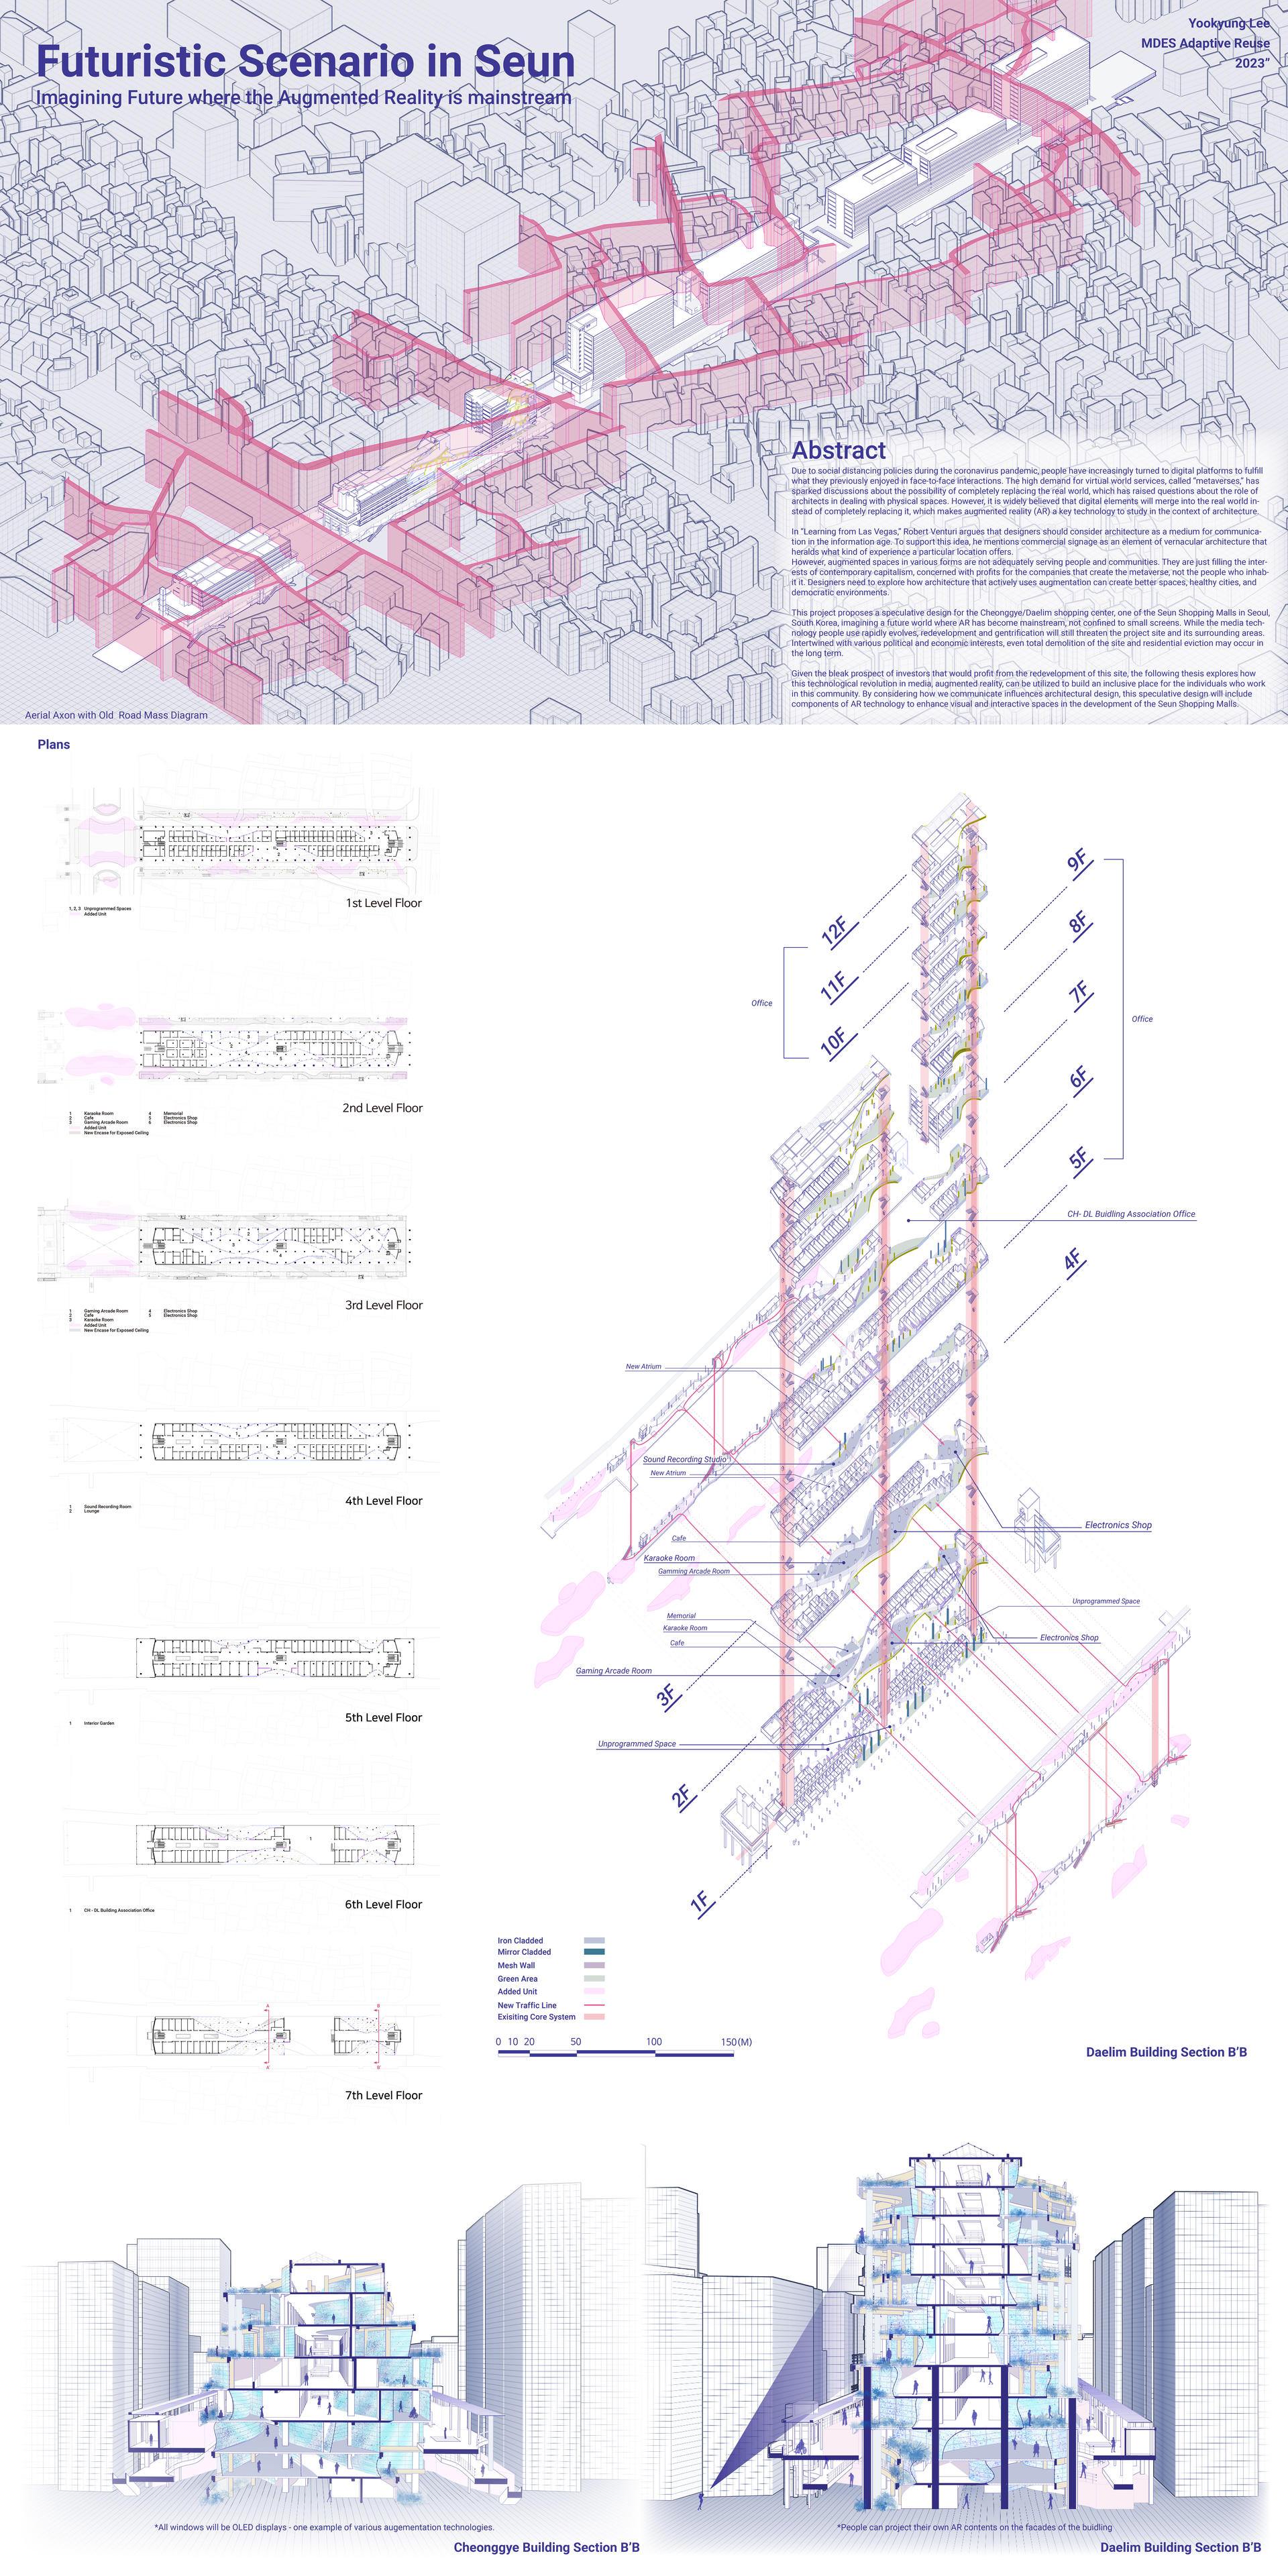 36" x 72" size panel for Grad Exhibition, including plans/ Sections / Exploded Axon / Aerial Axon